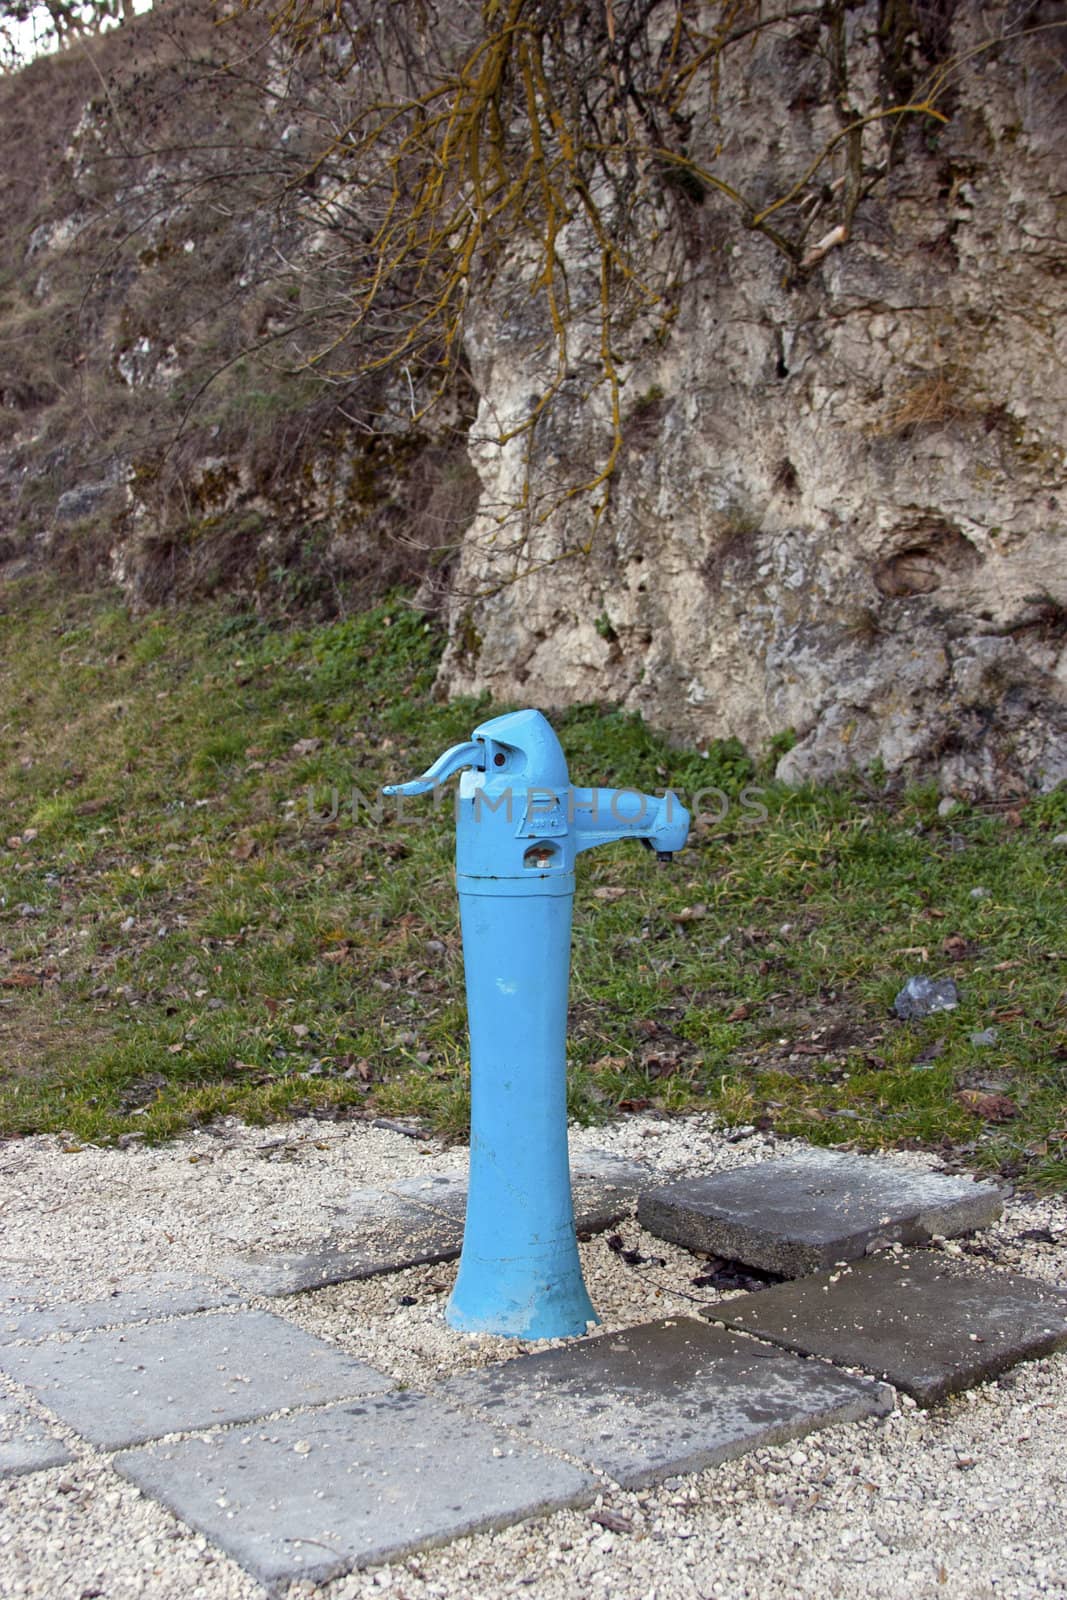 A typical blue street fountain in a park